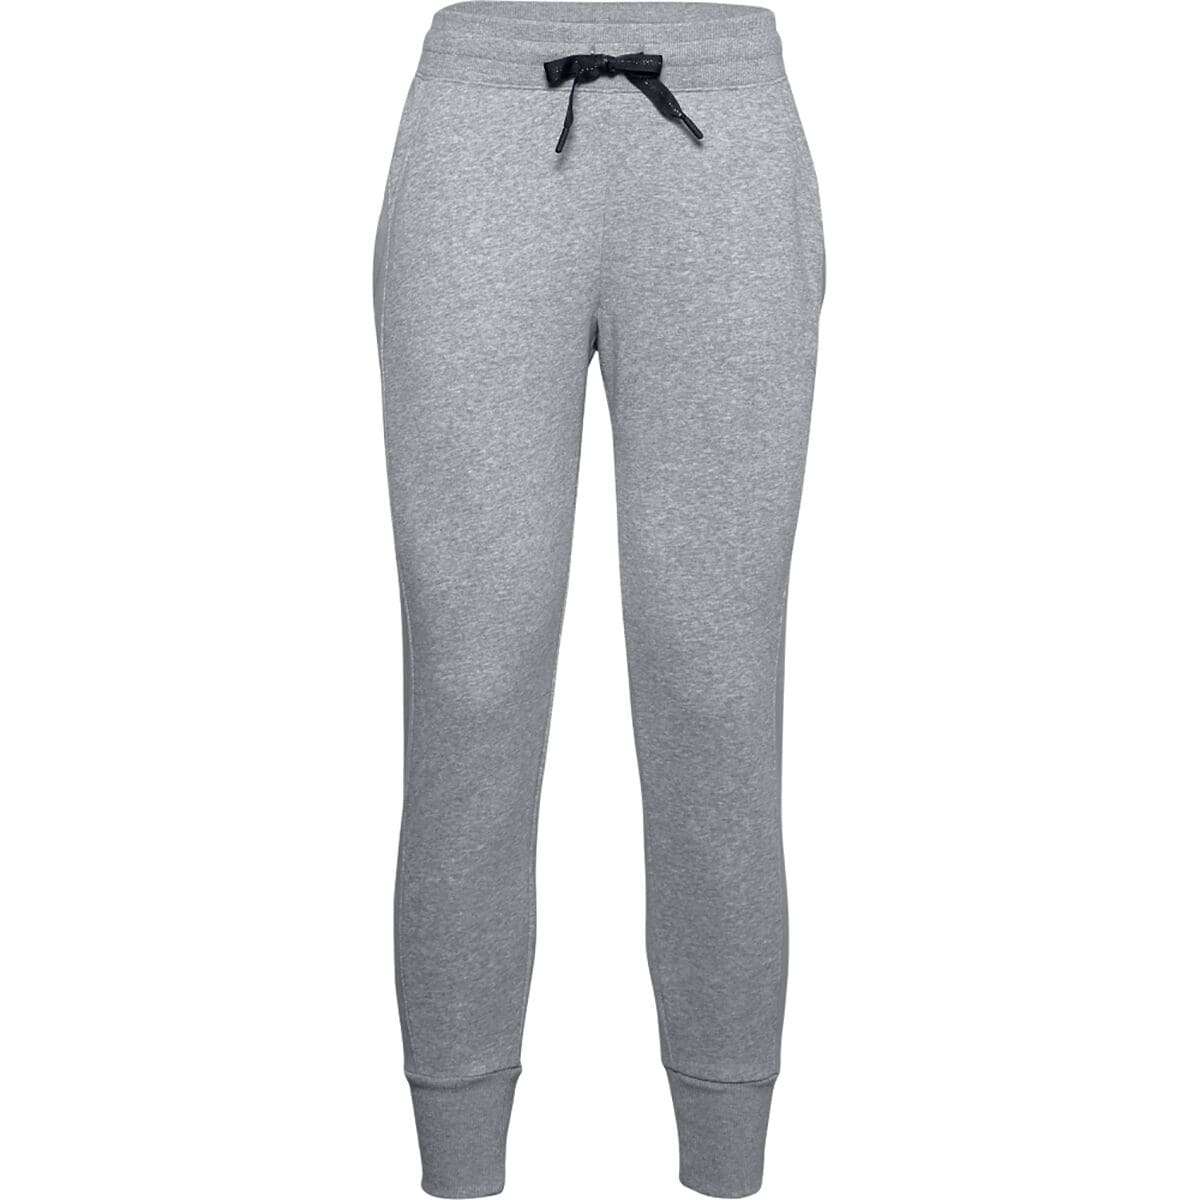 Under Armour Rival Fleece EMB Pant - Women's - Clothing